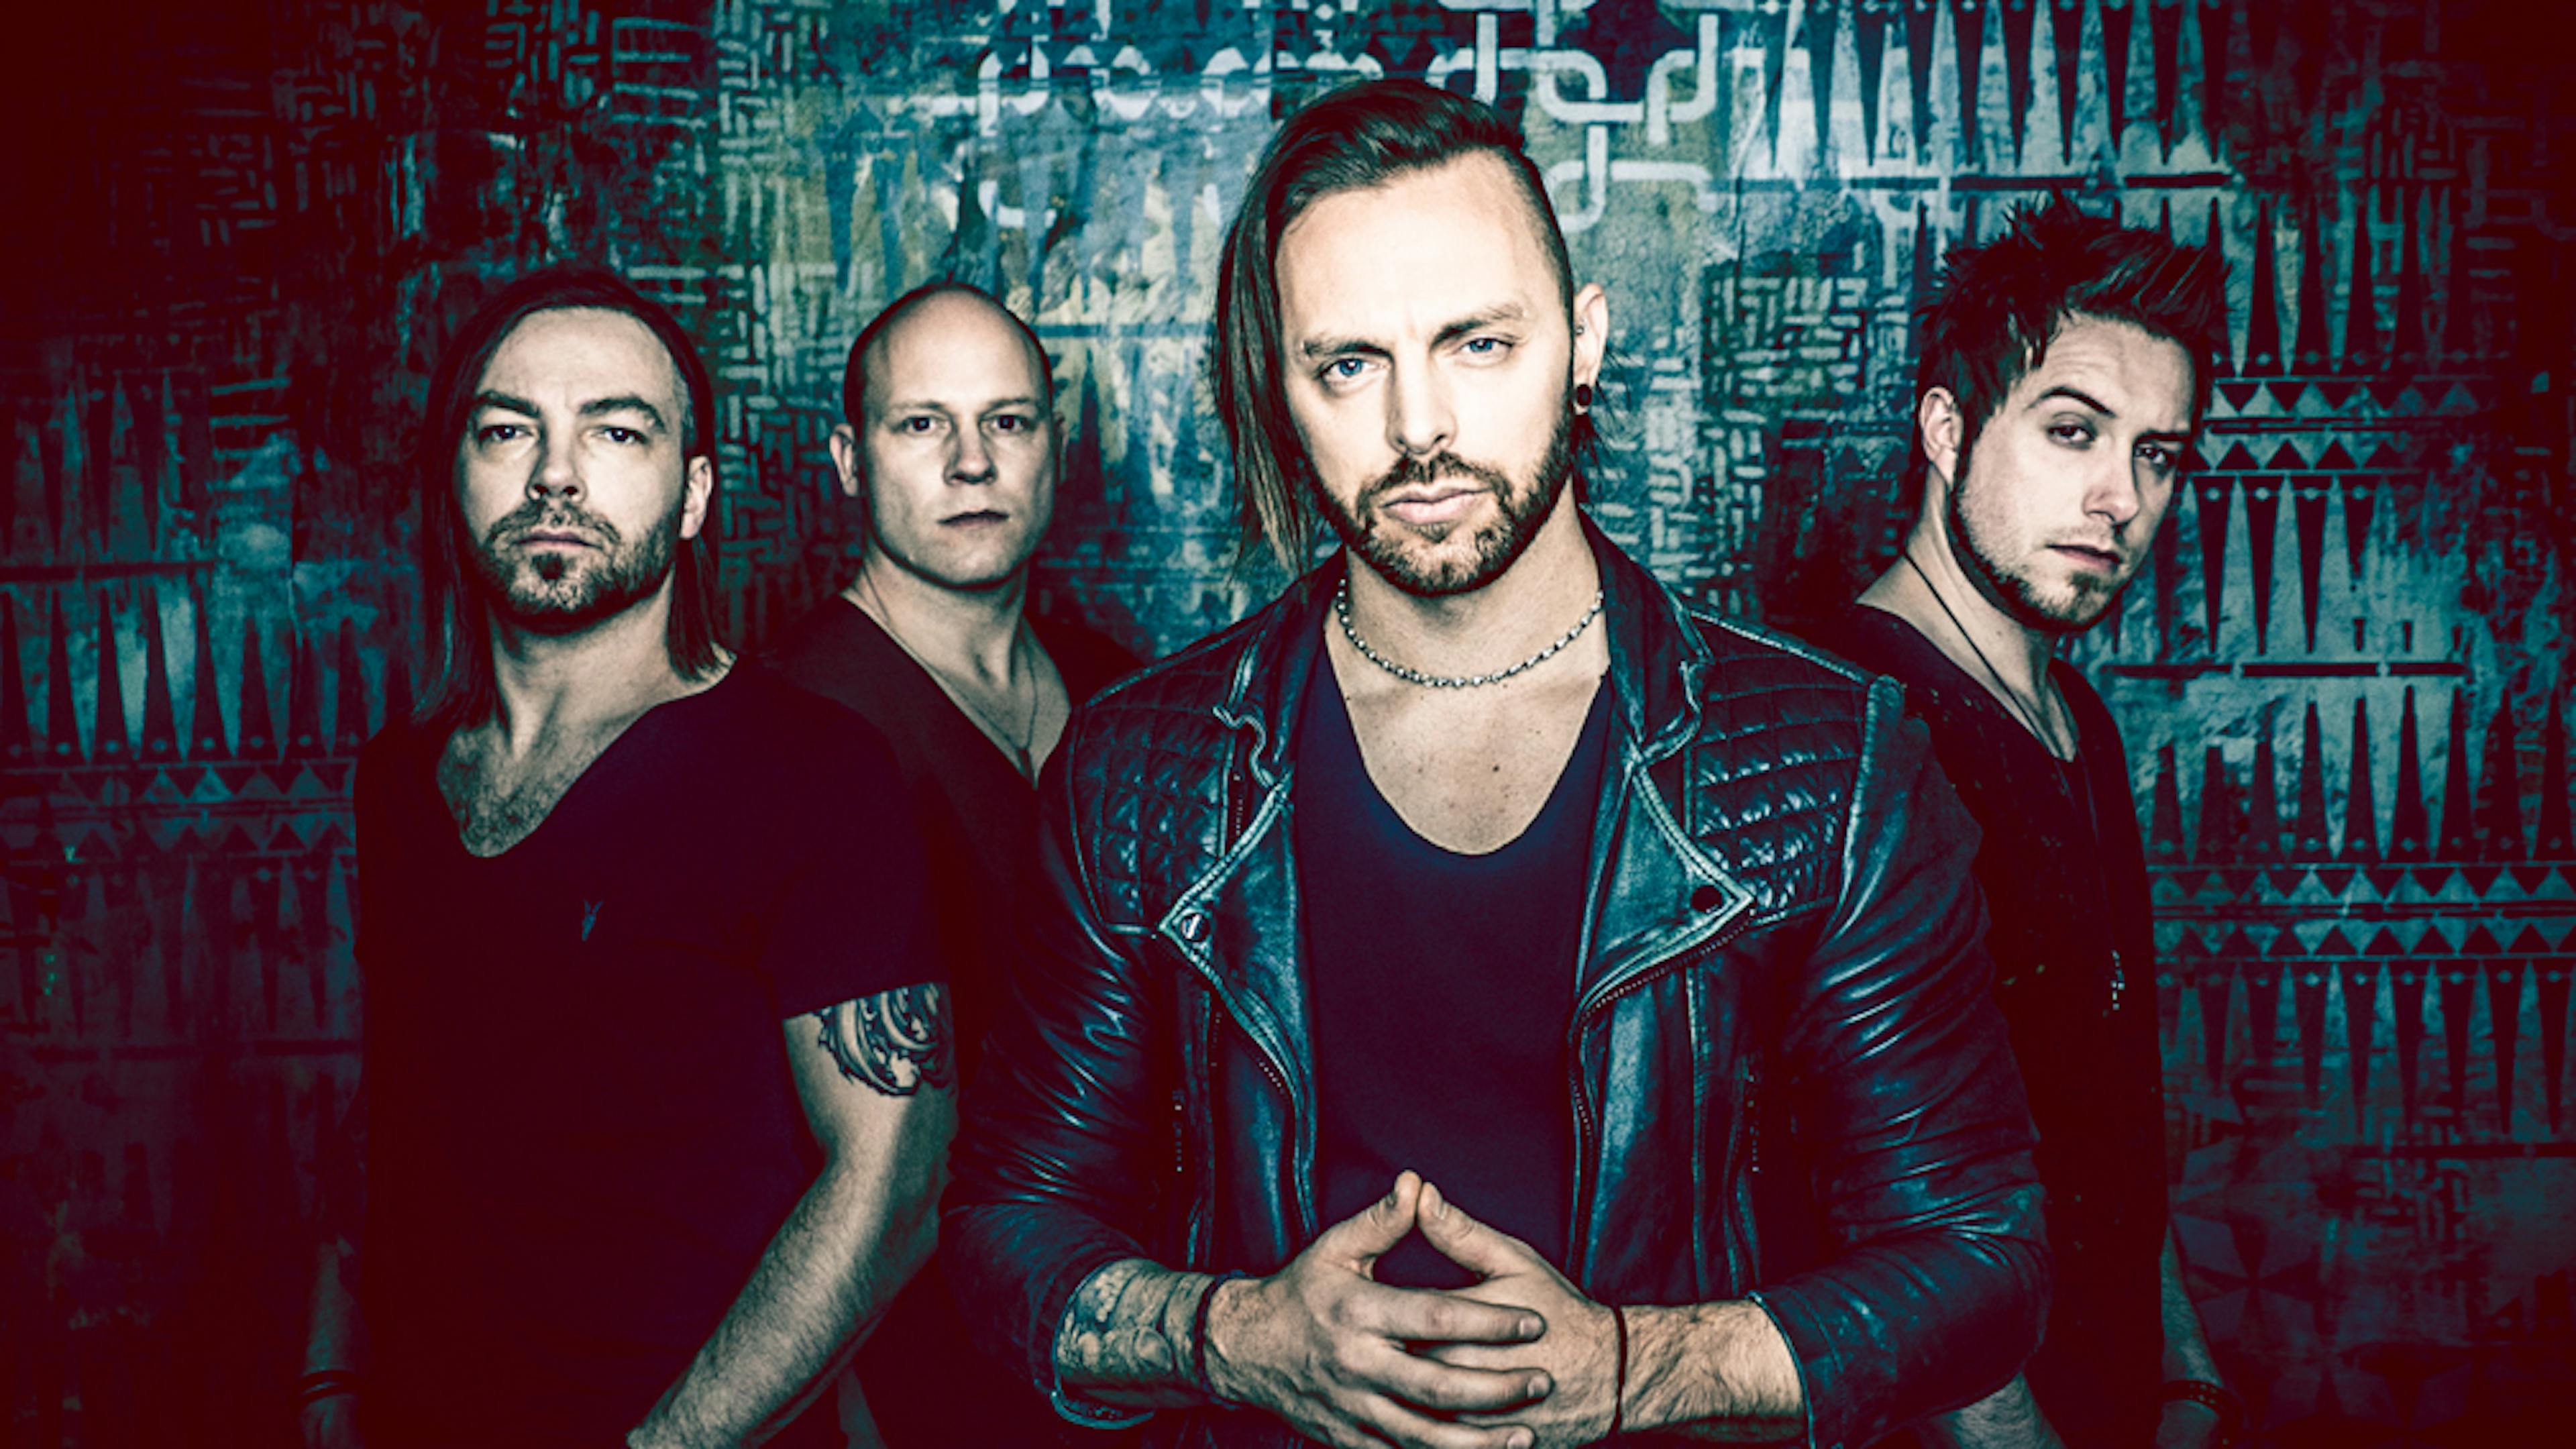 Listen To Bullet For My Valentine's Imagine Dragons Cover